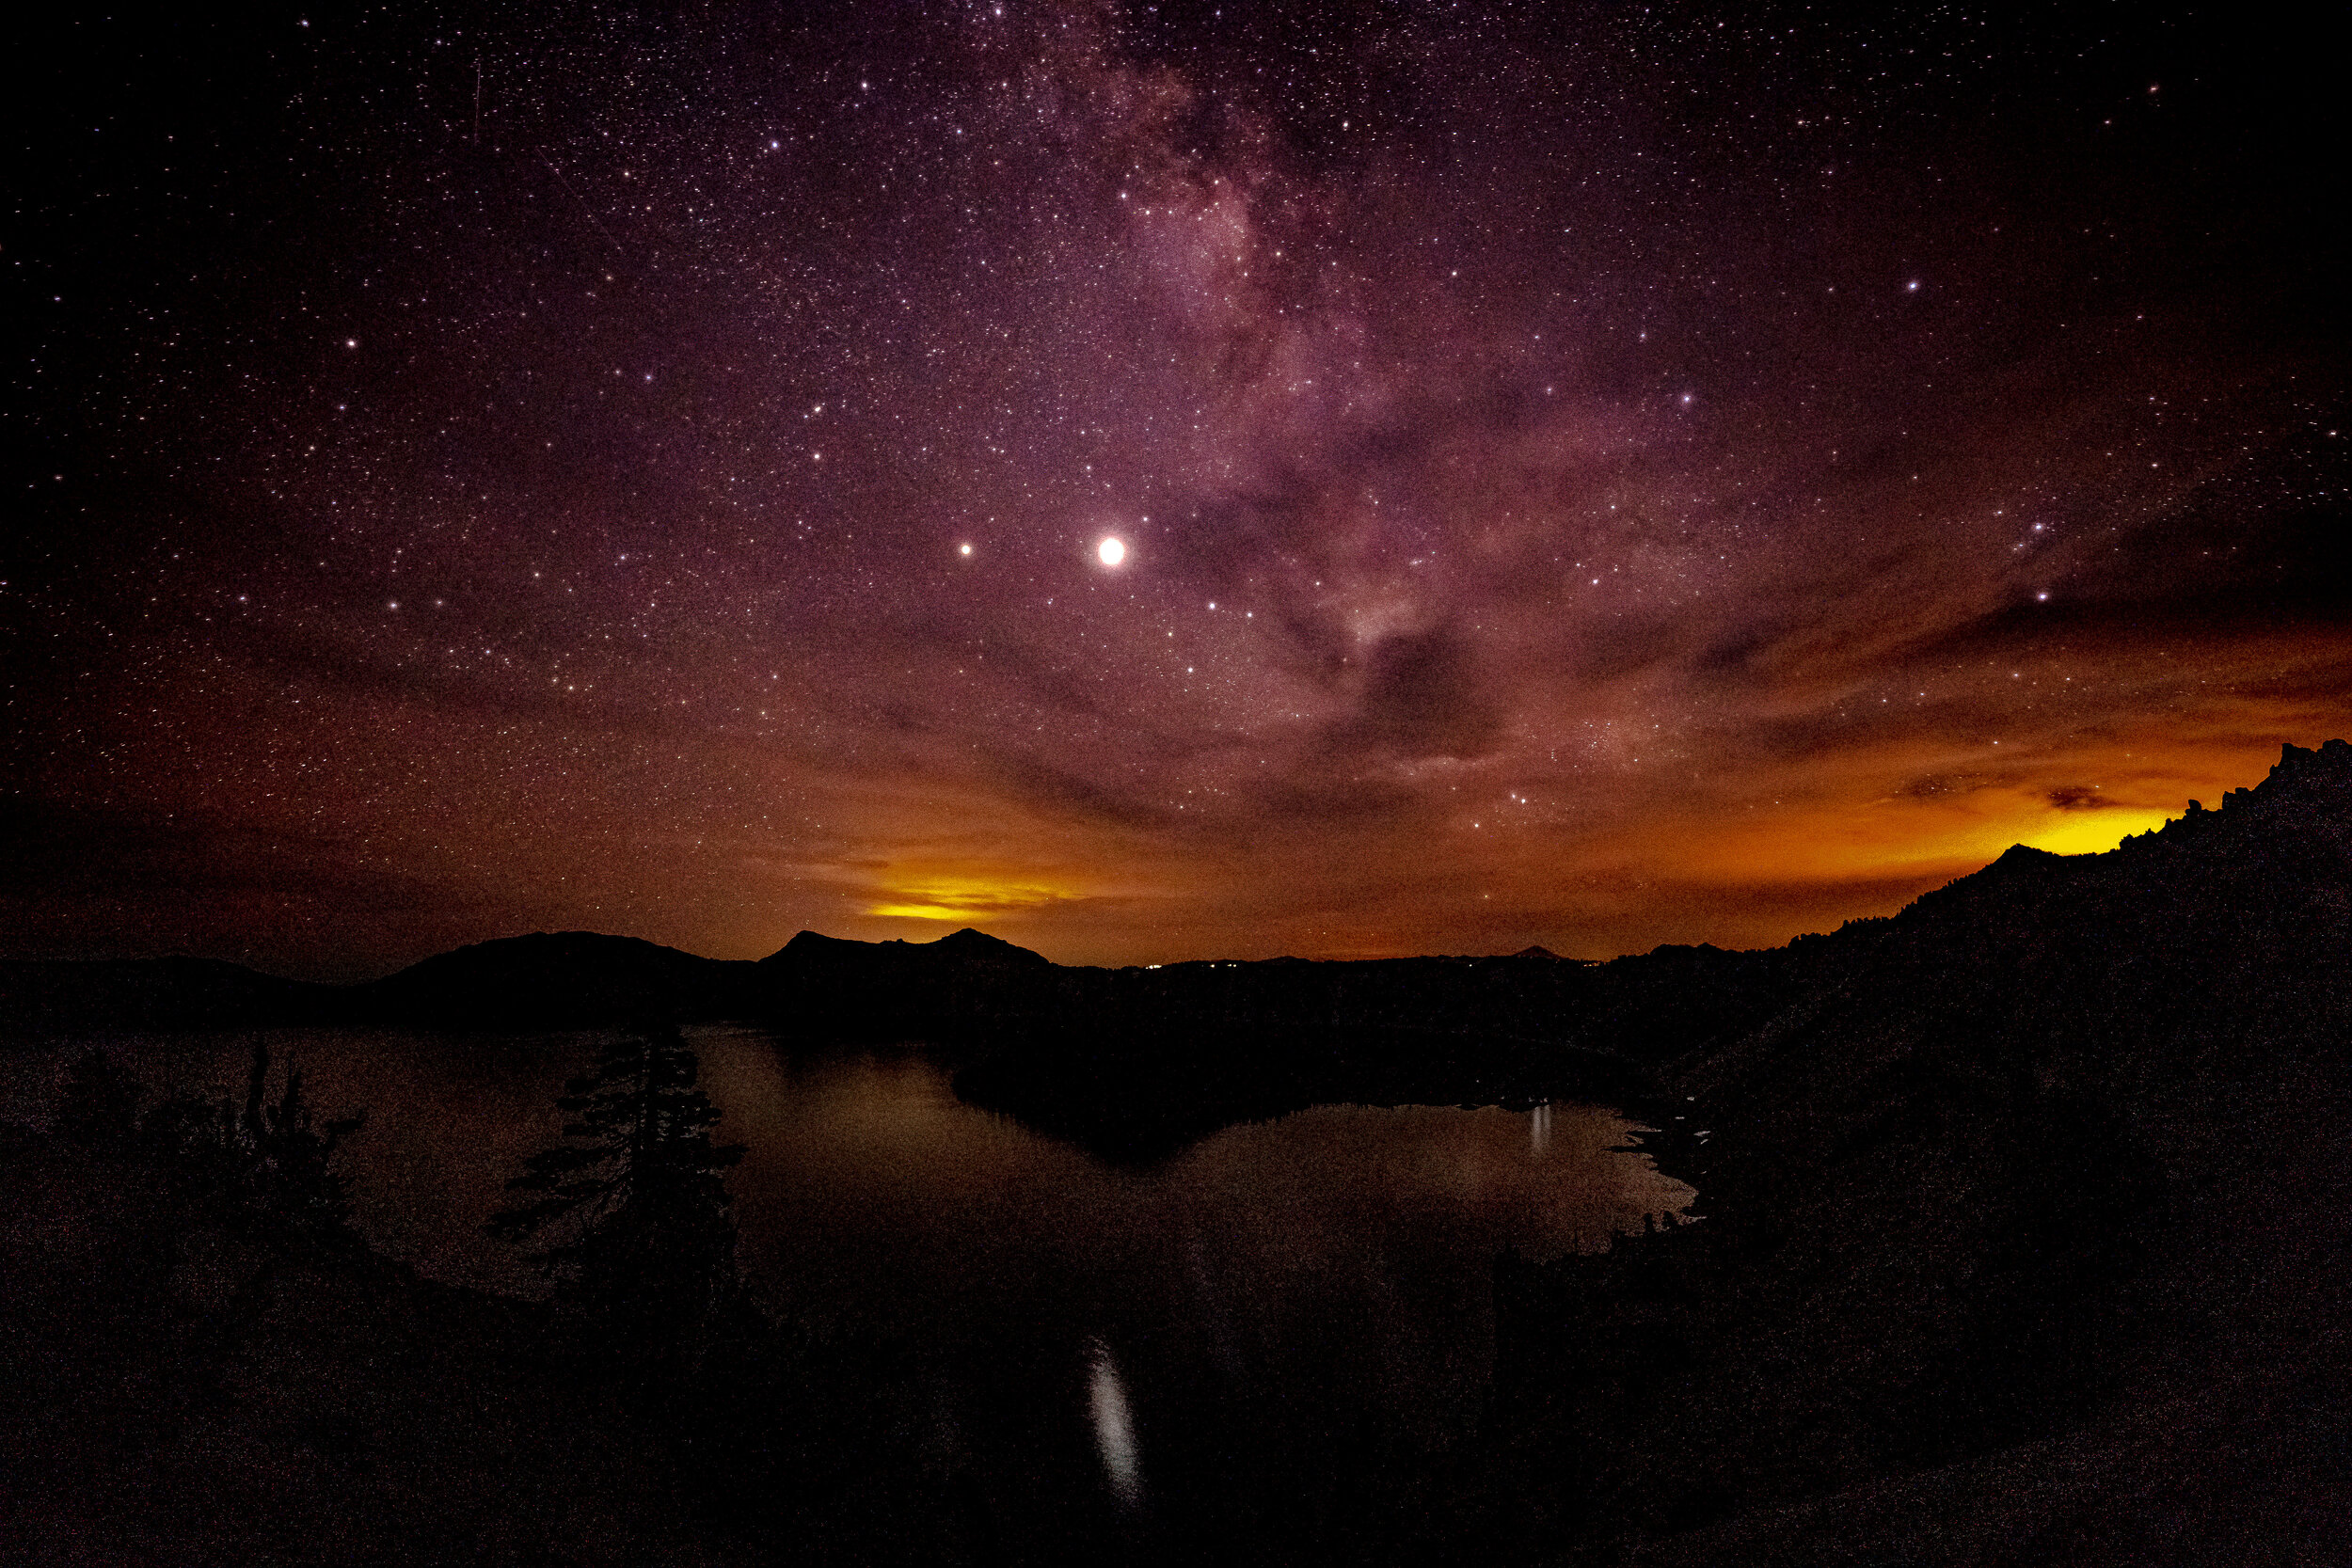  Remotely located away from the light pollution of nearby cities, Crater Lake is an excellent place for astrophotography. Craig took this picture of the Milky Way over Crater Lake one night. 